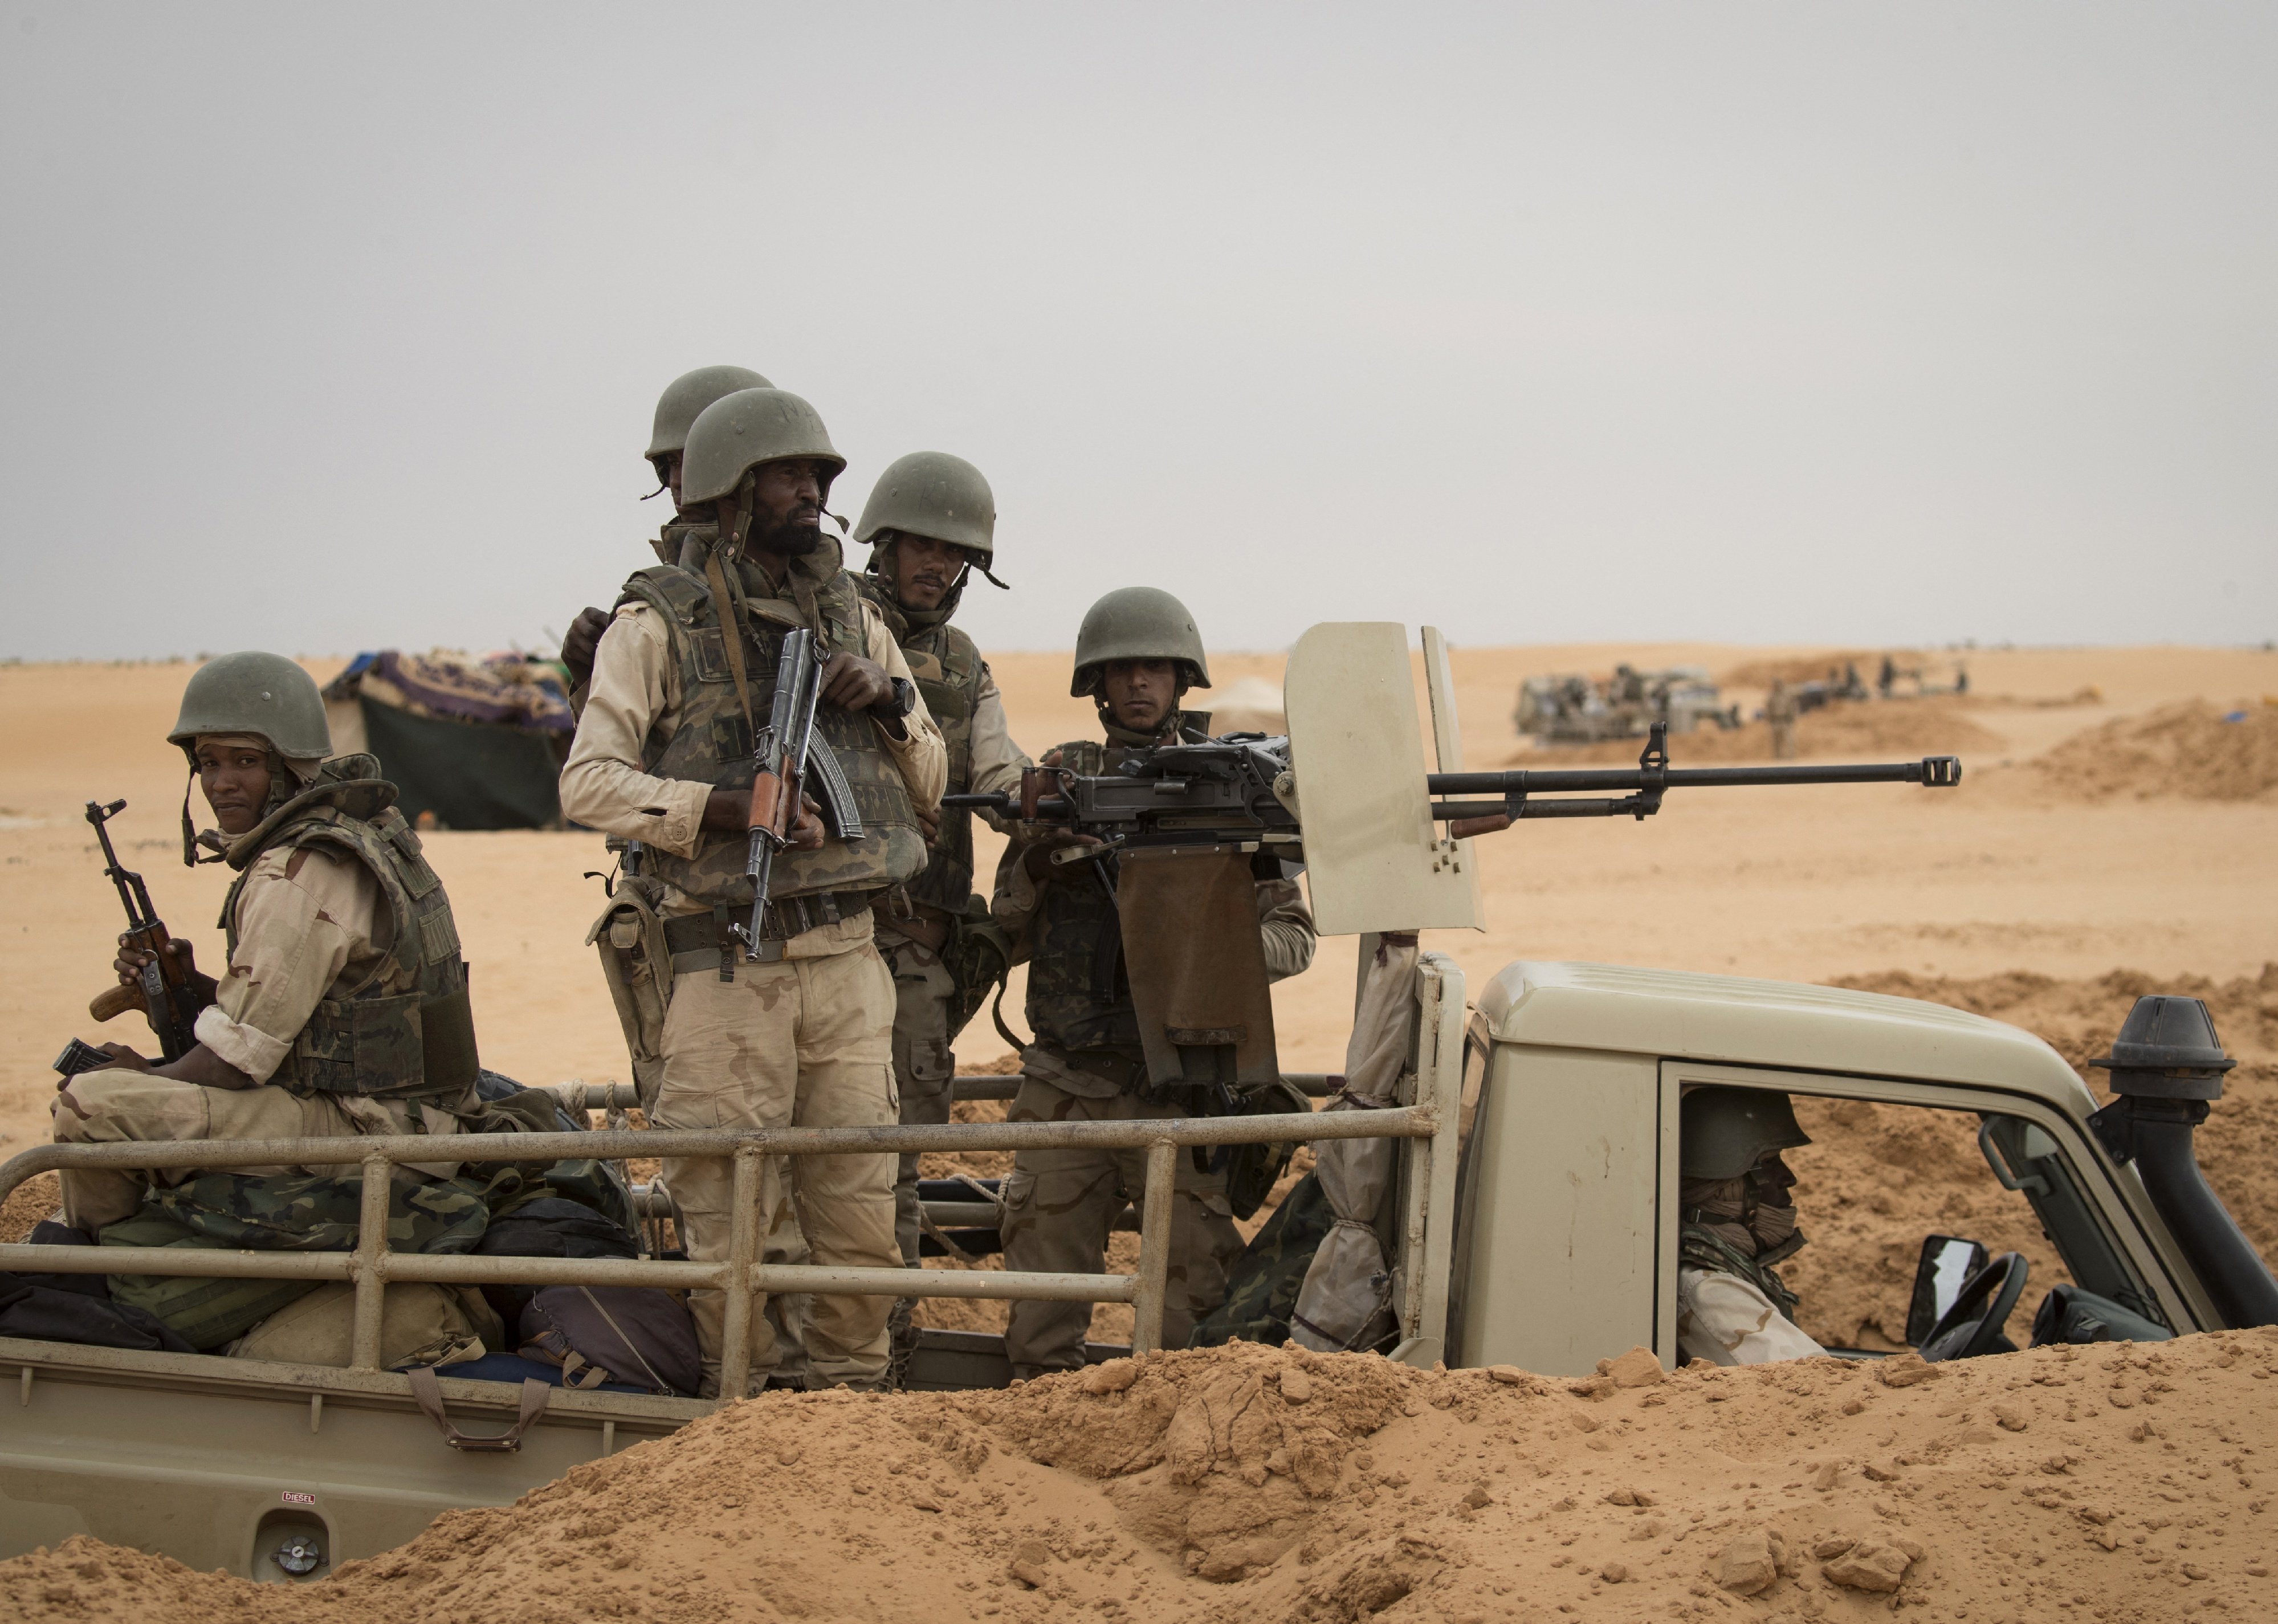 Soldiers of the Mauritania Army wait in an armed vehicle at a G5 Sahel task force outpost.